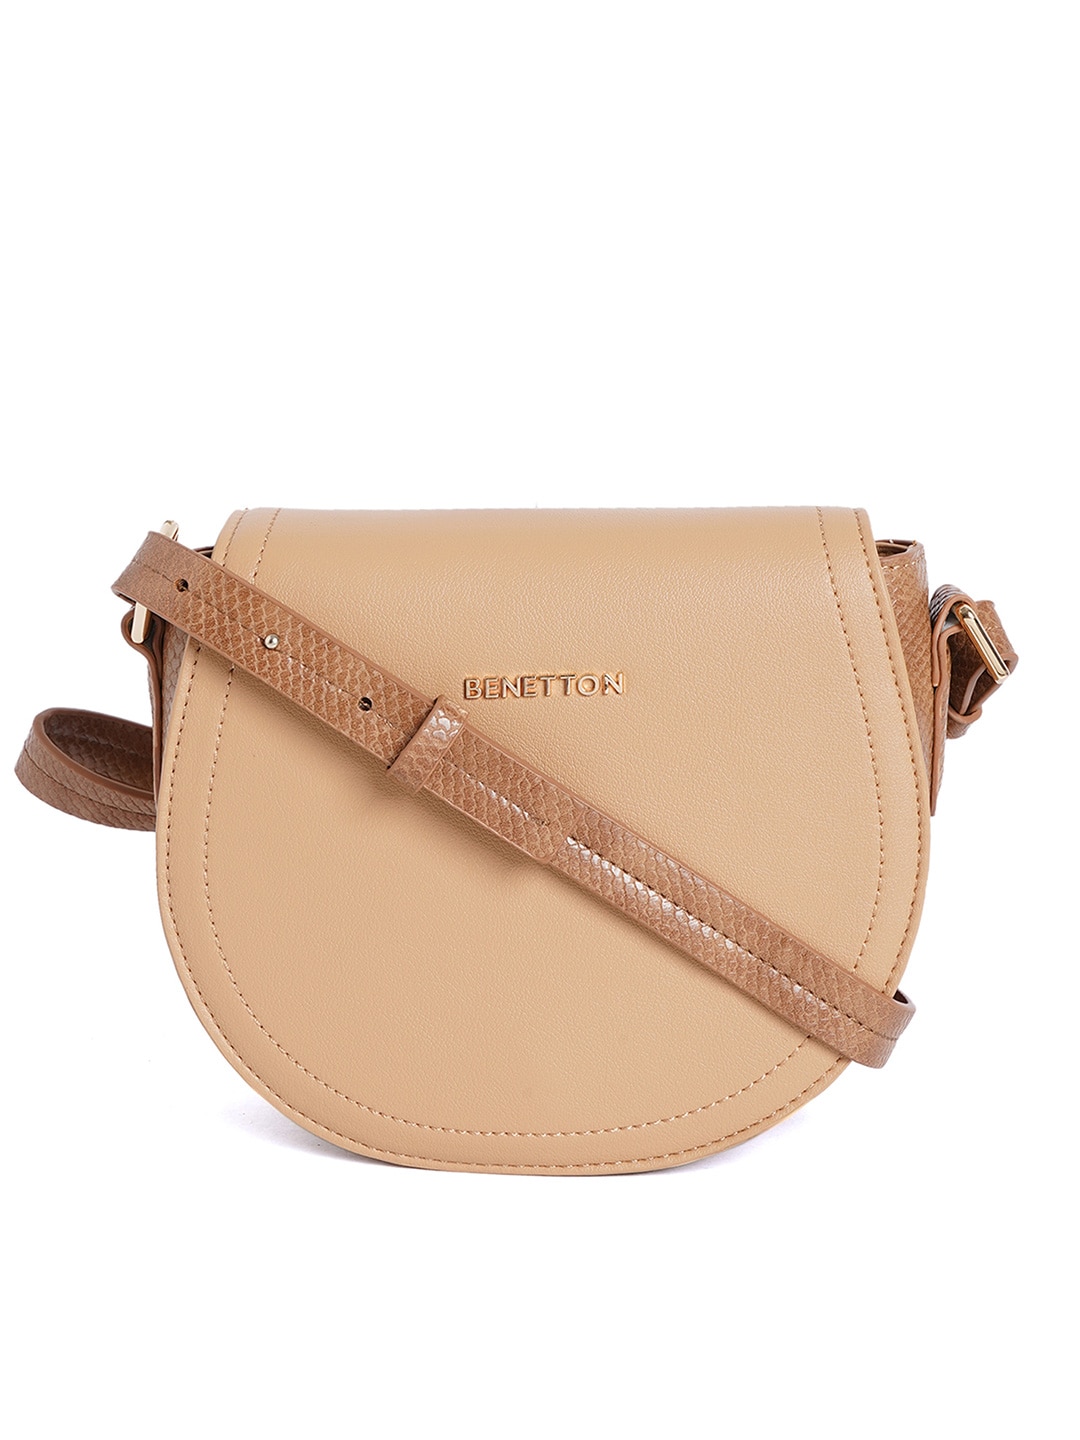 United Colors of Benetton Beige Structured Sling Bag Price in India